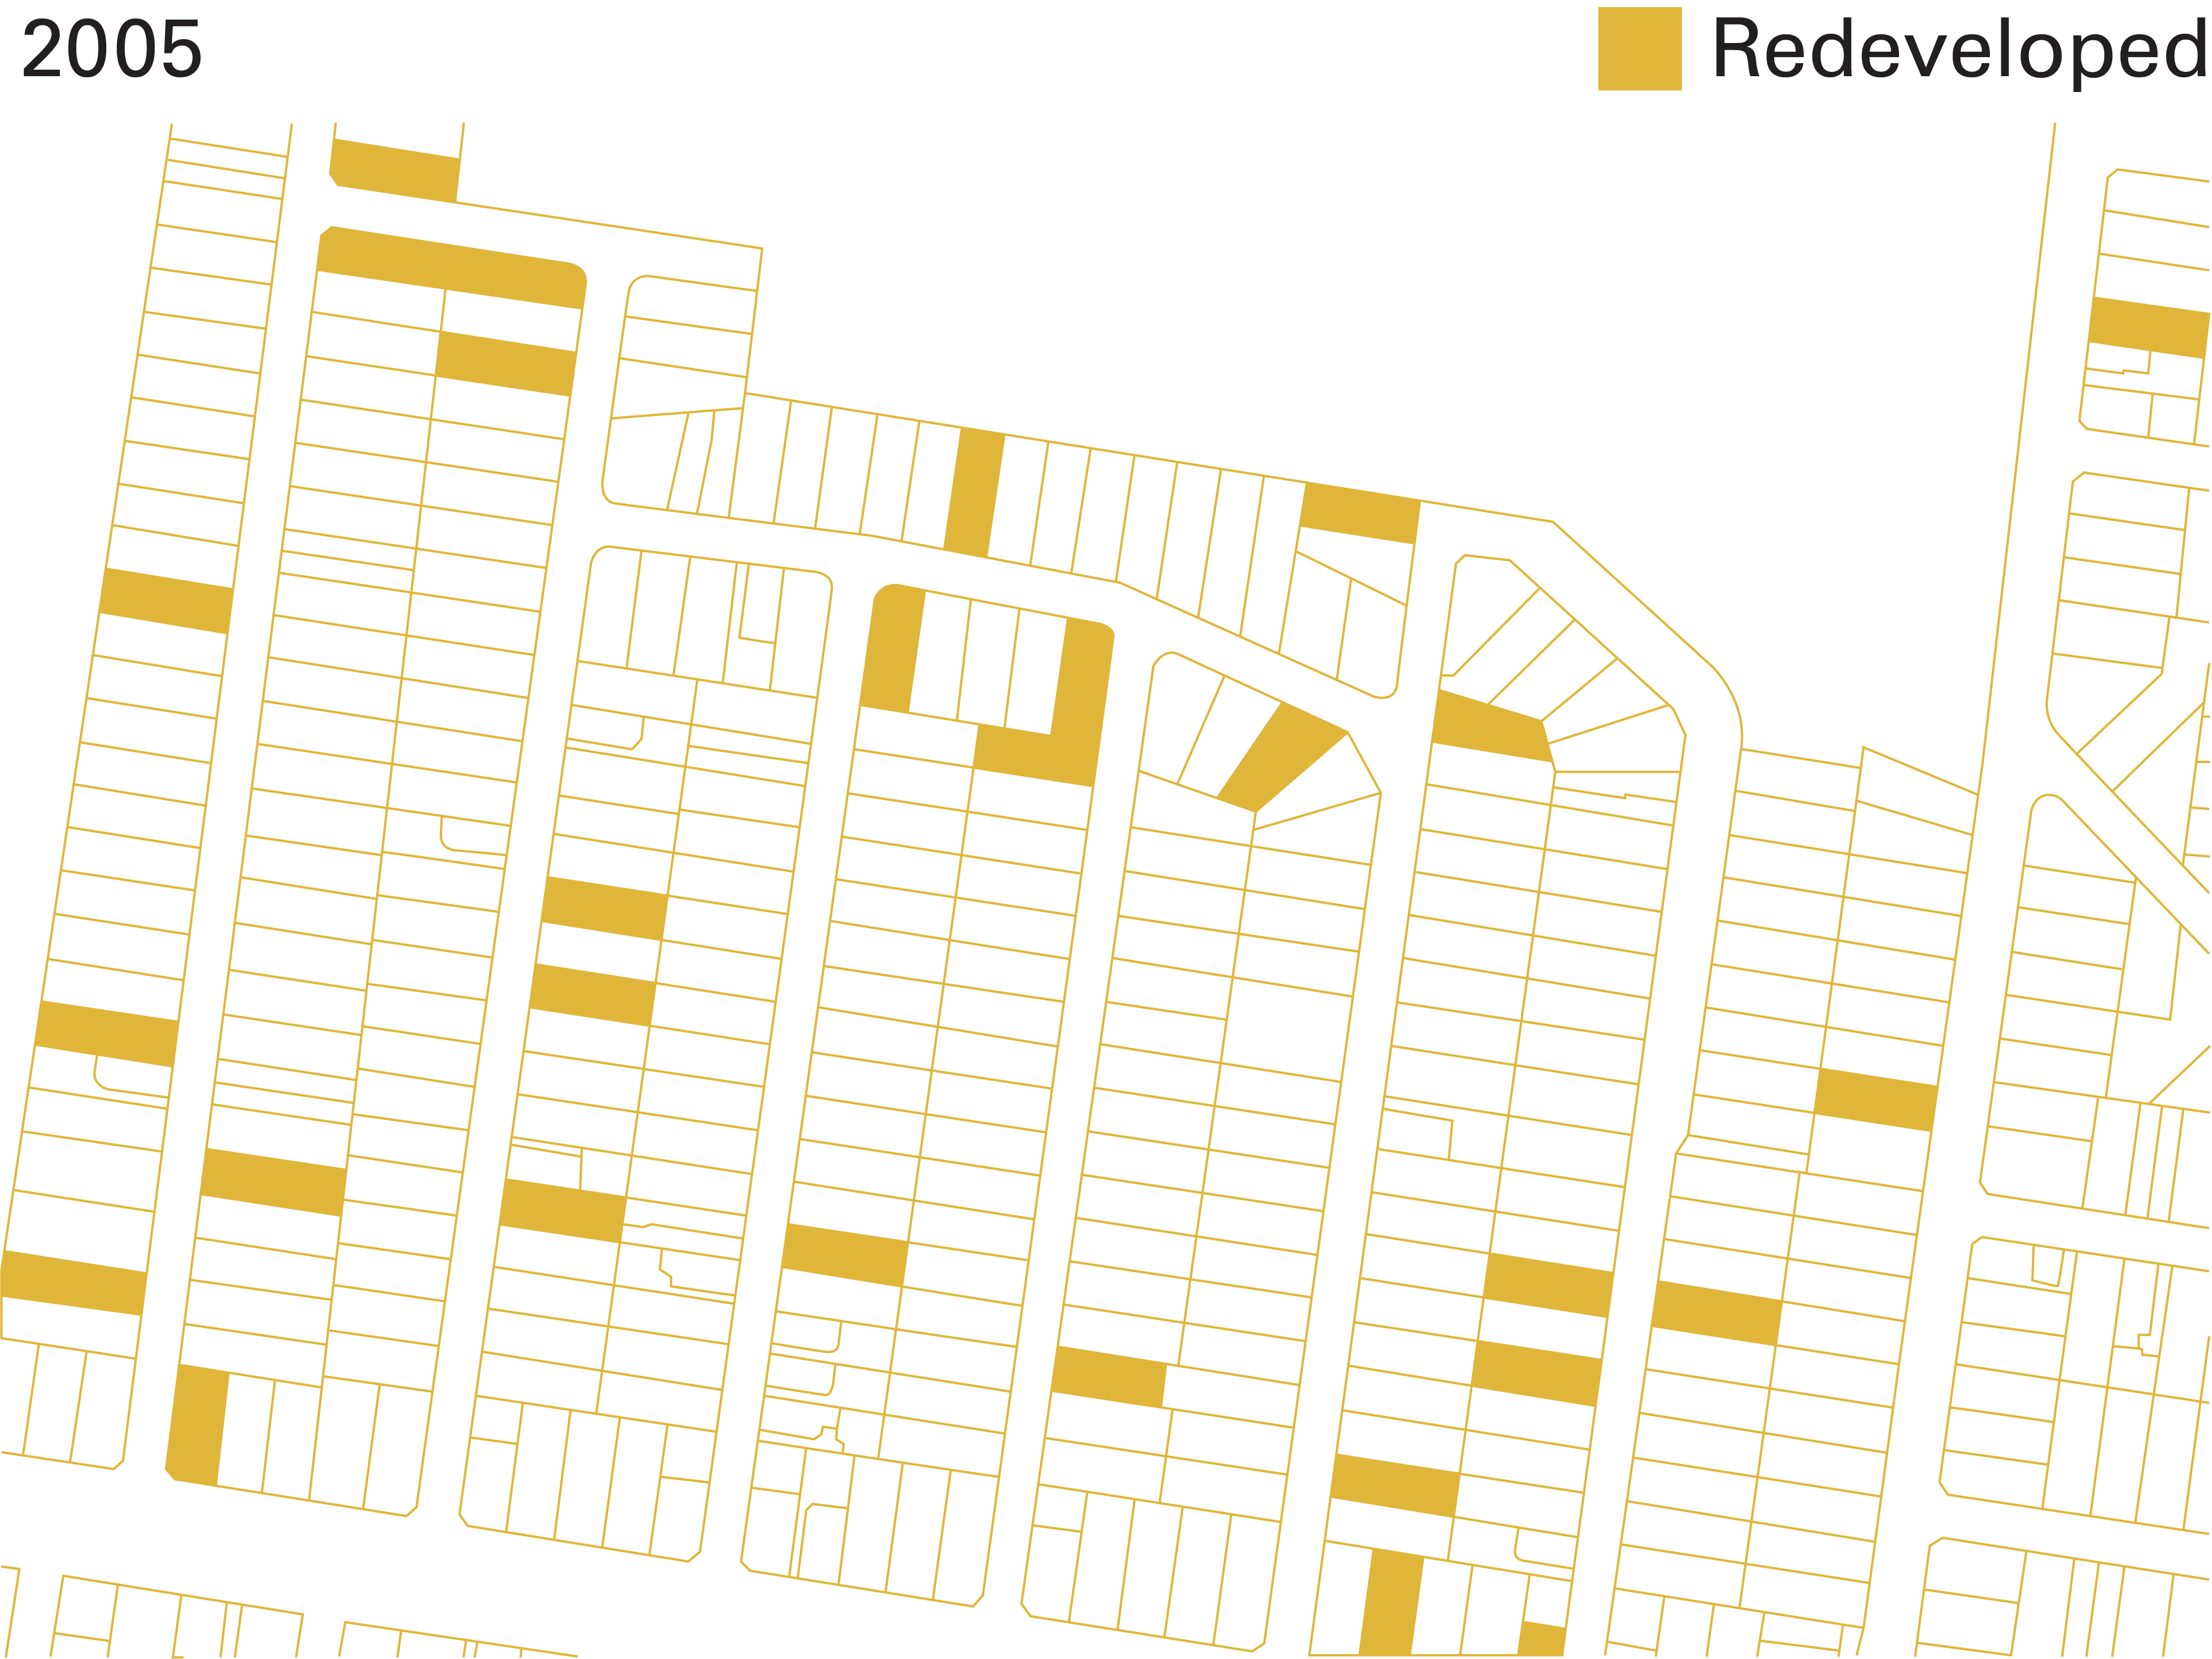 A GIF showing a grid street network with individual lots highlighted in yellow demonstrating growing redevelopment activity between 2005 and 2016